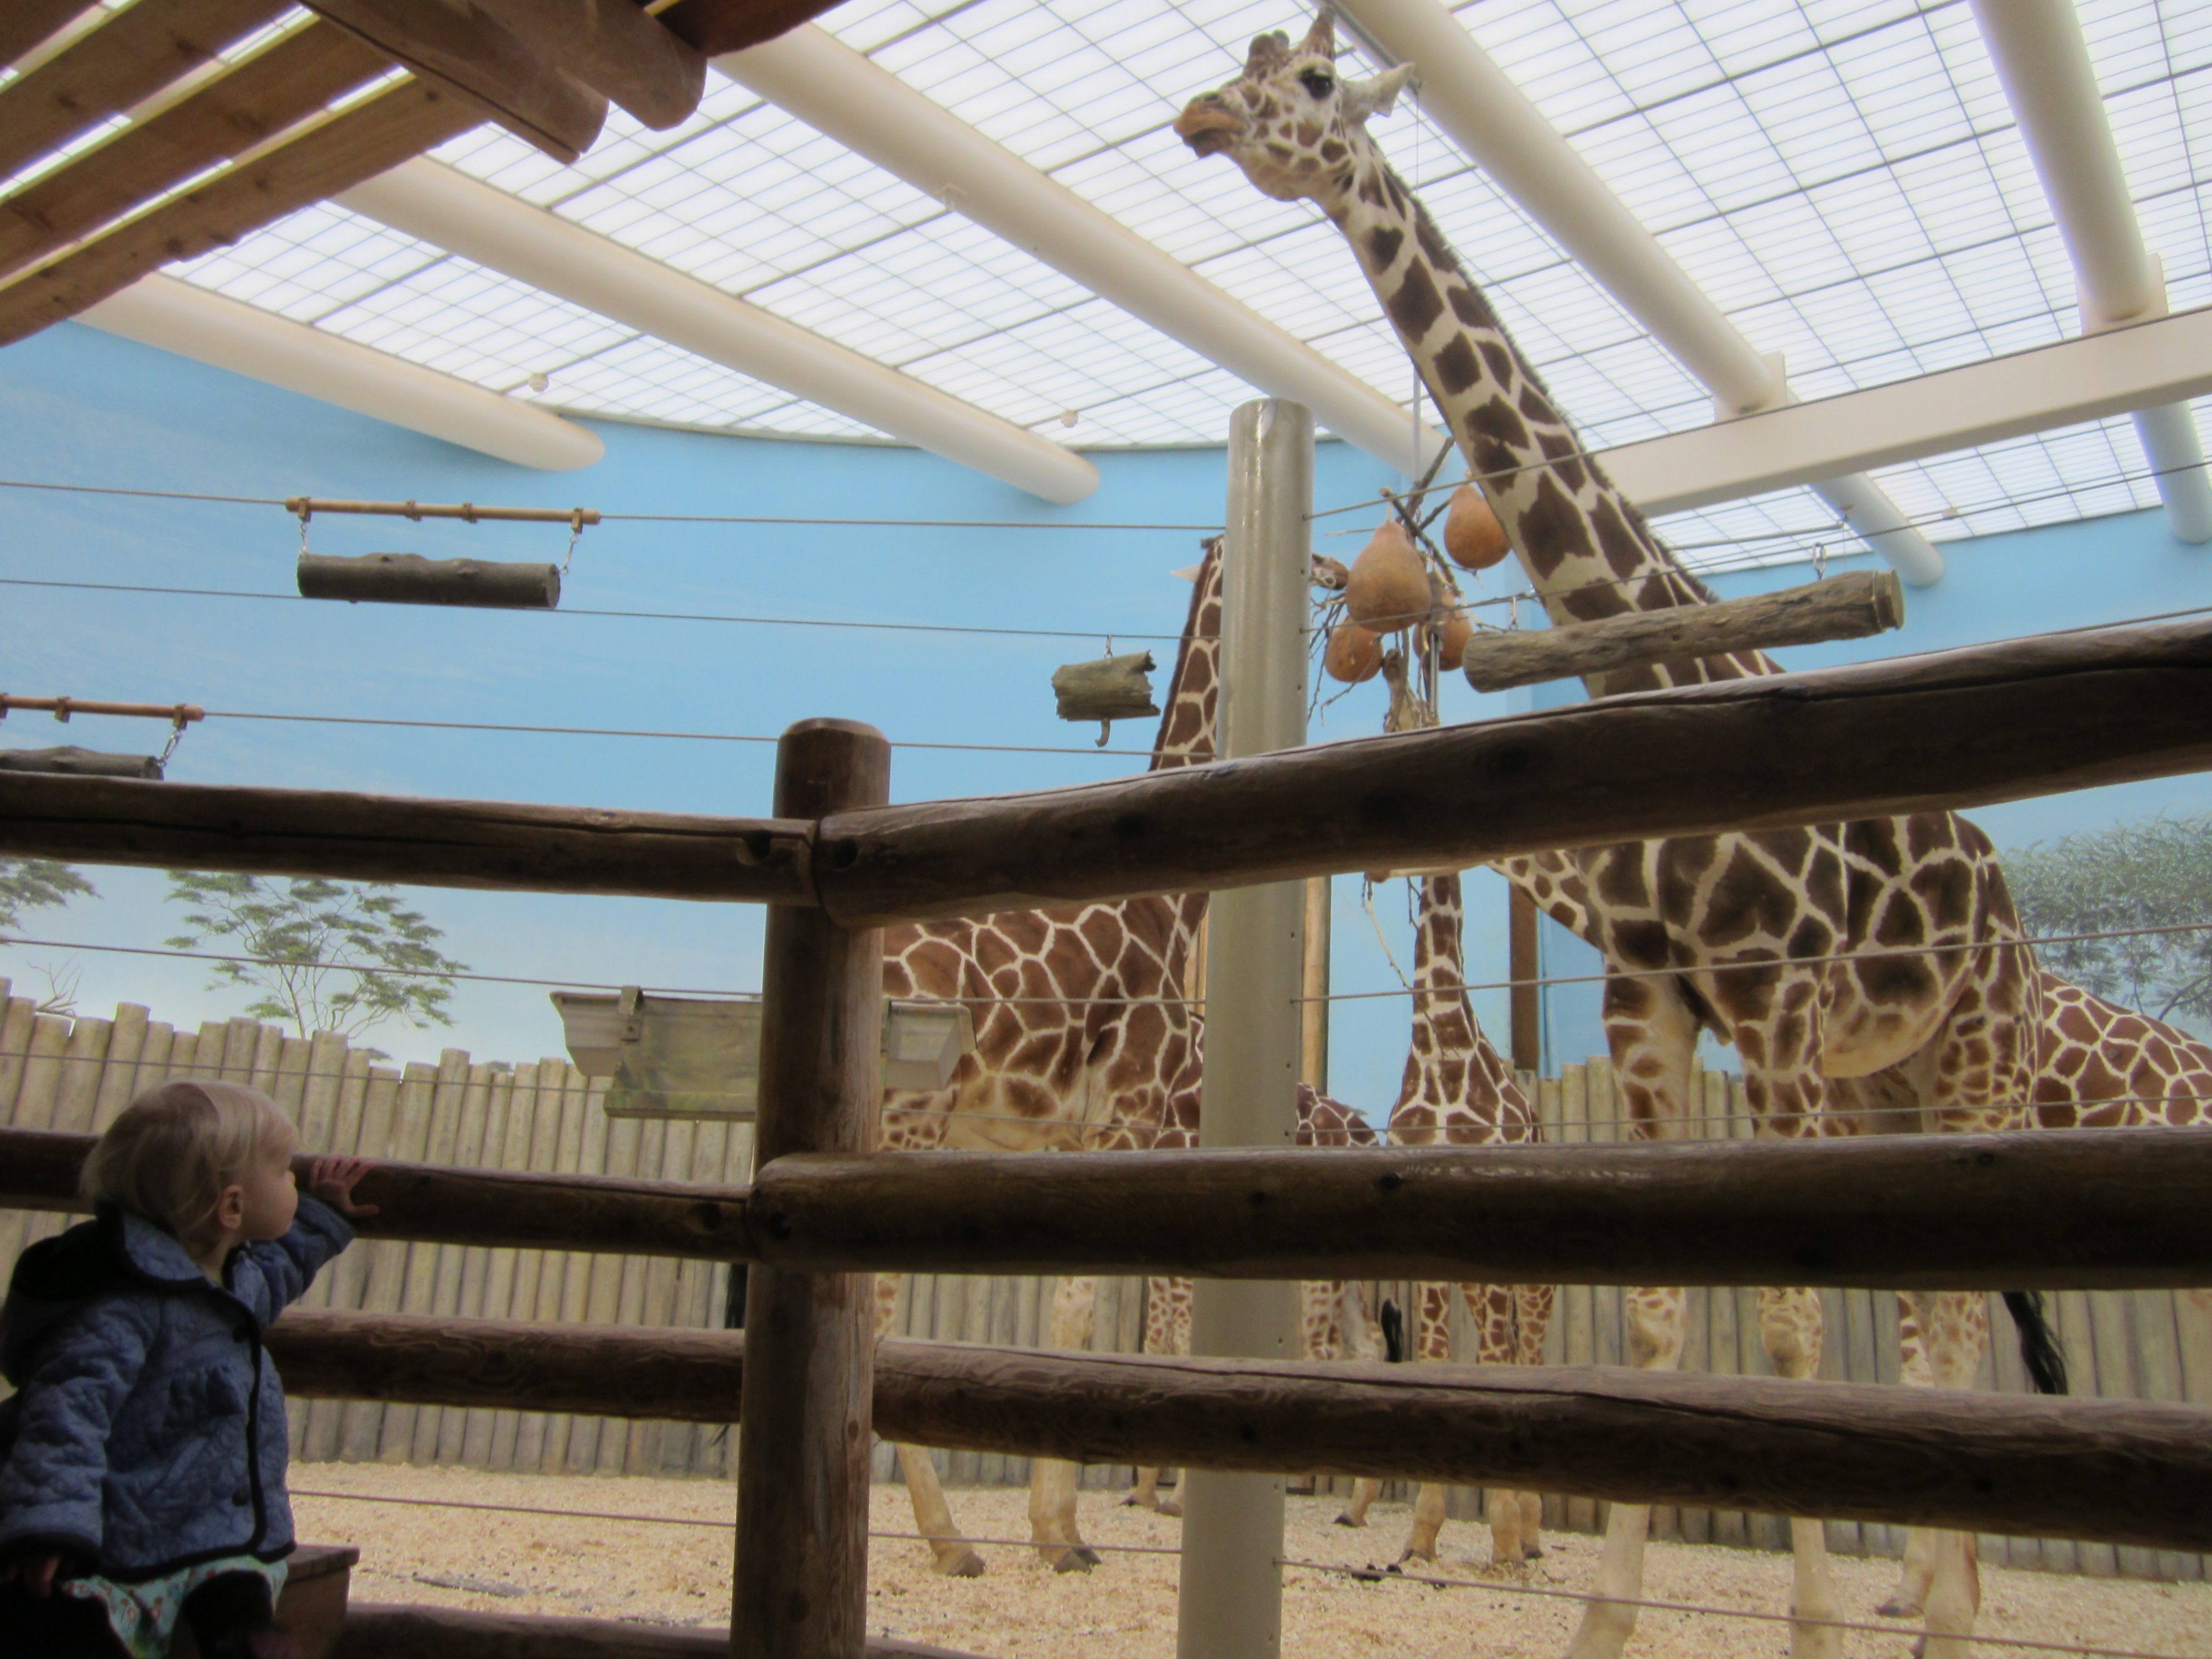 Peeper visits the giraffes at the Brookfield Zoo in Illinois during Christmas.